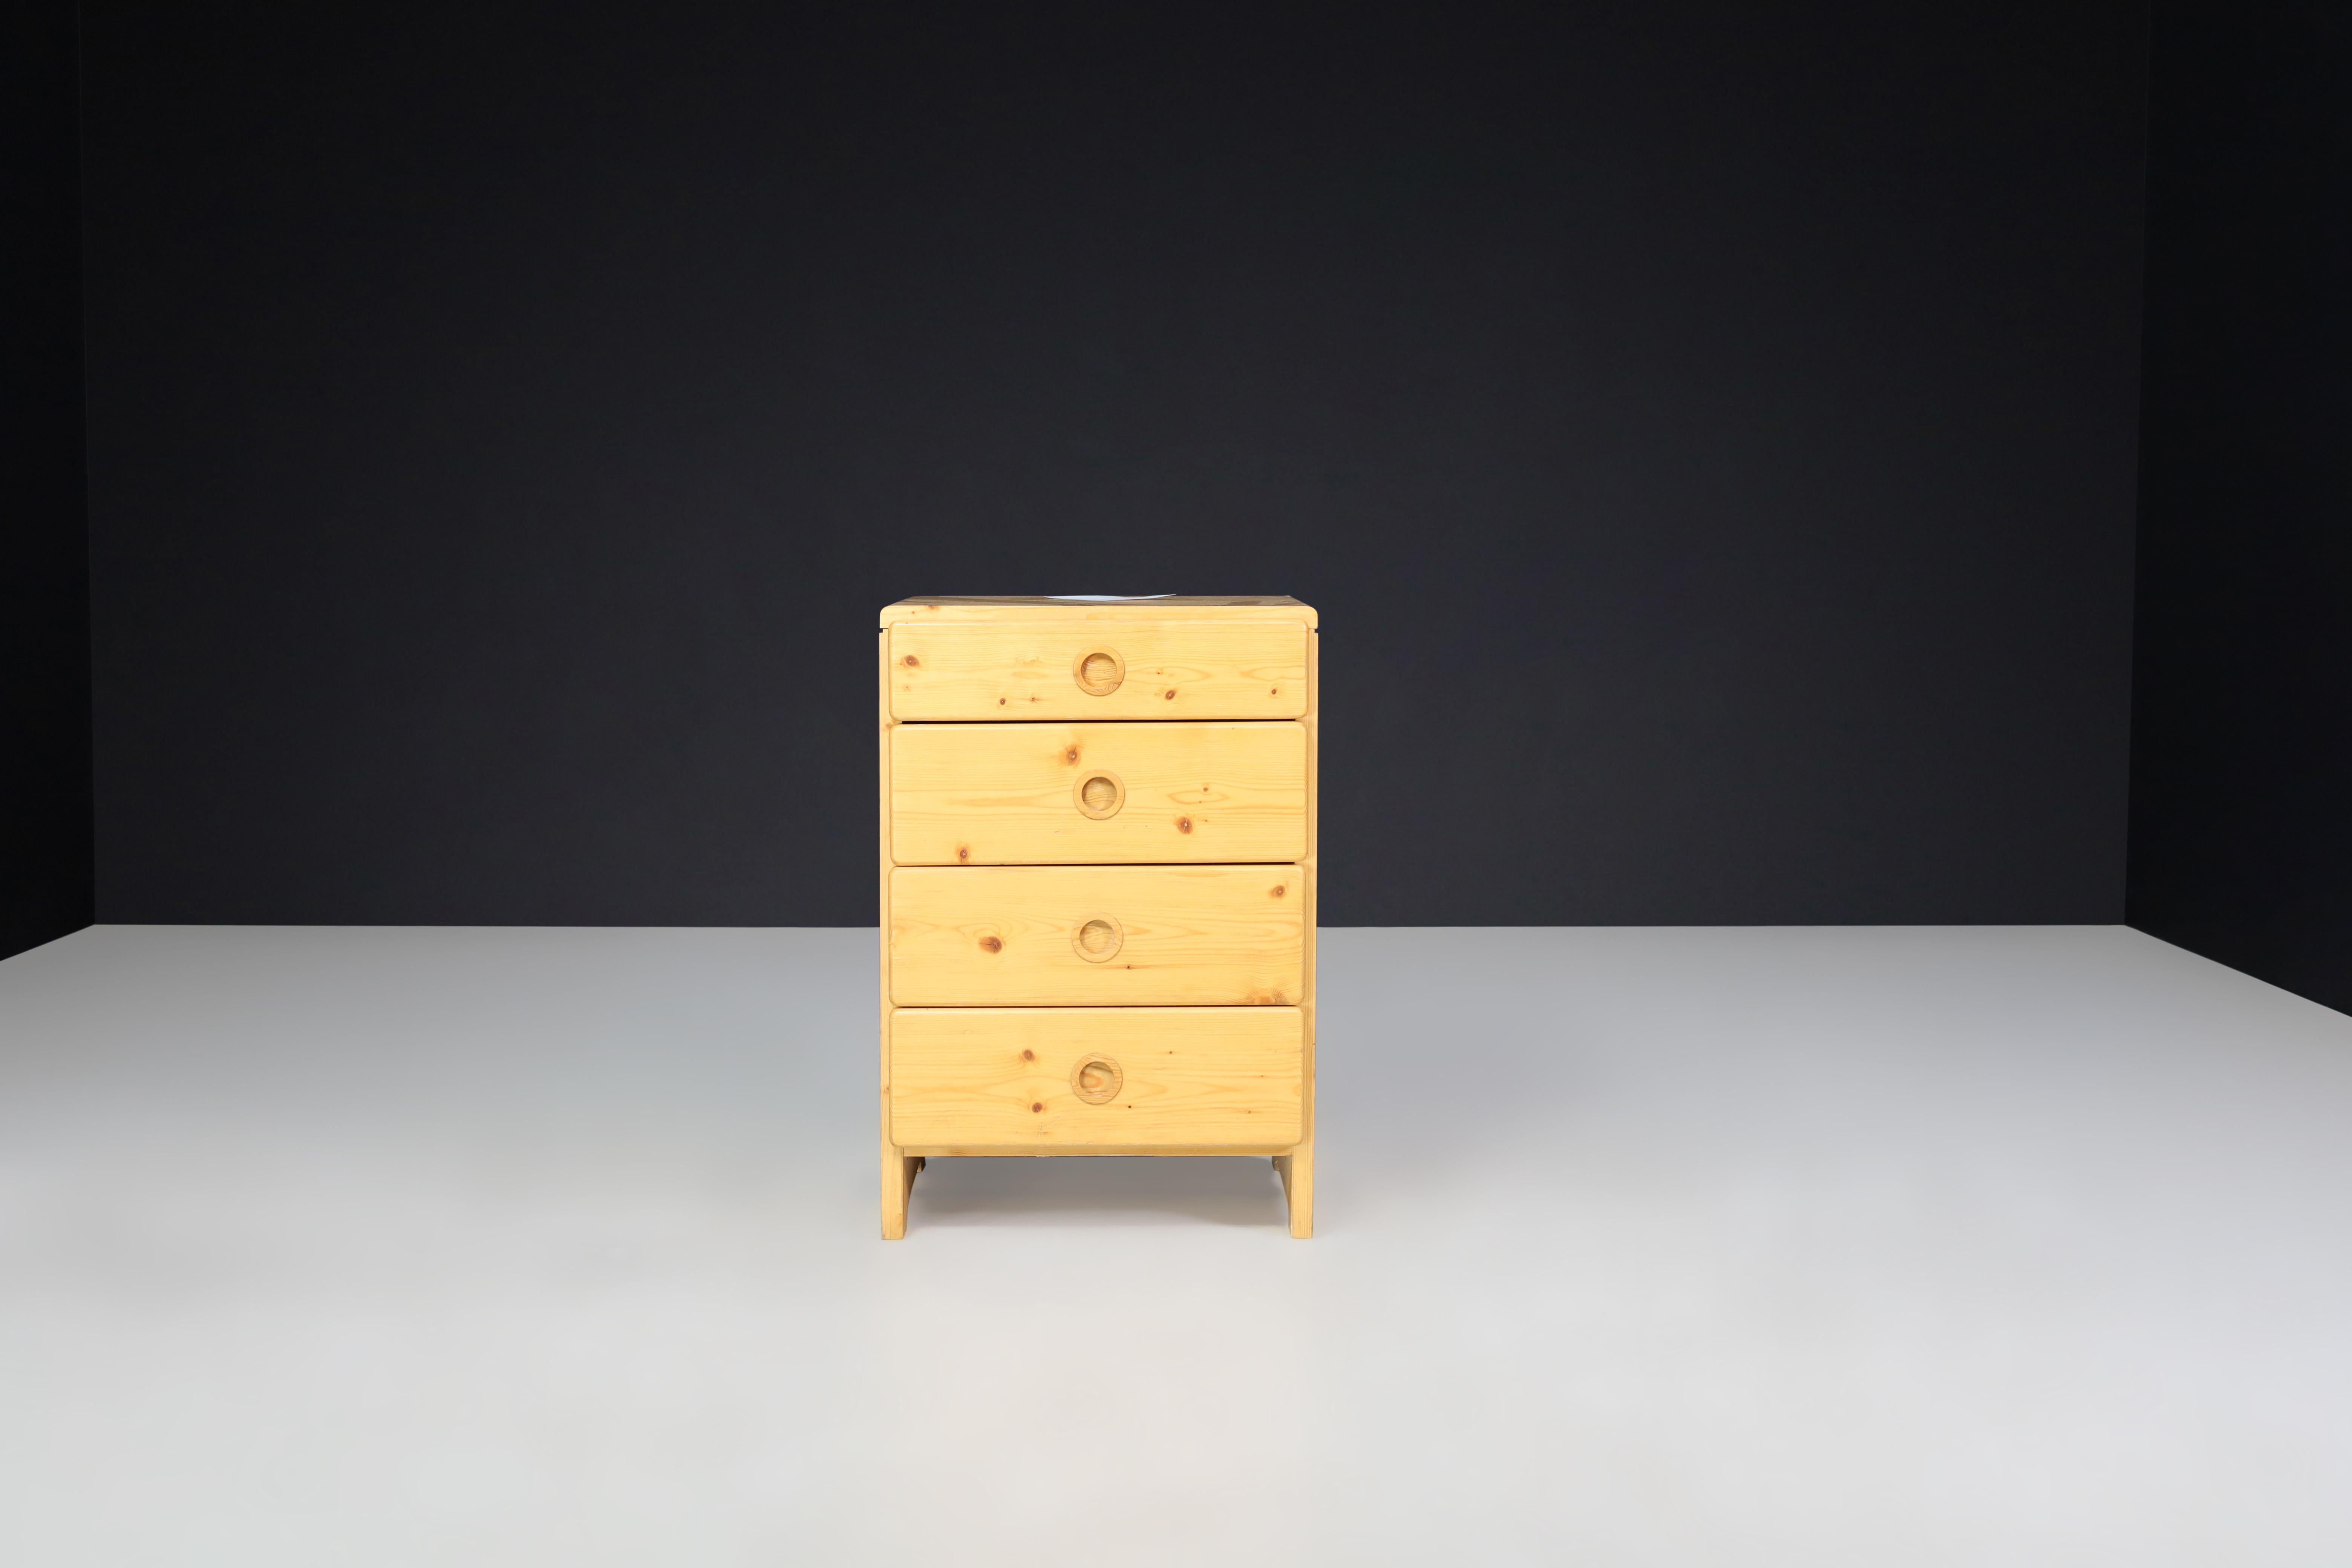 Charlotte Perriand Chest of Drawers for Les Arcs, France 1960s

This is a description of a pine chest of drawers that was designed by Charlotte Perriand for Les Arcs in the 1960s. The chest features four pull-out drawers and is made of solid pine.